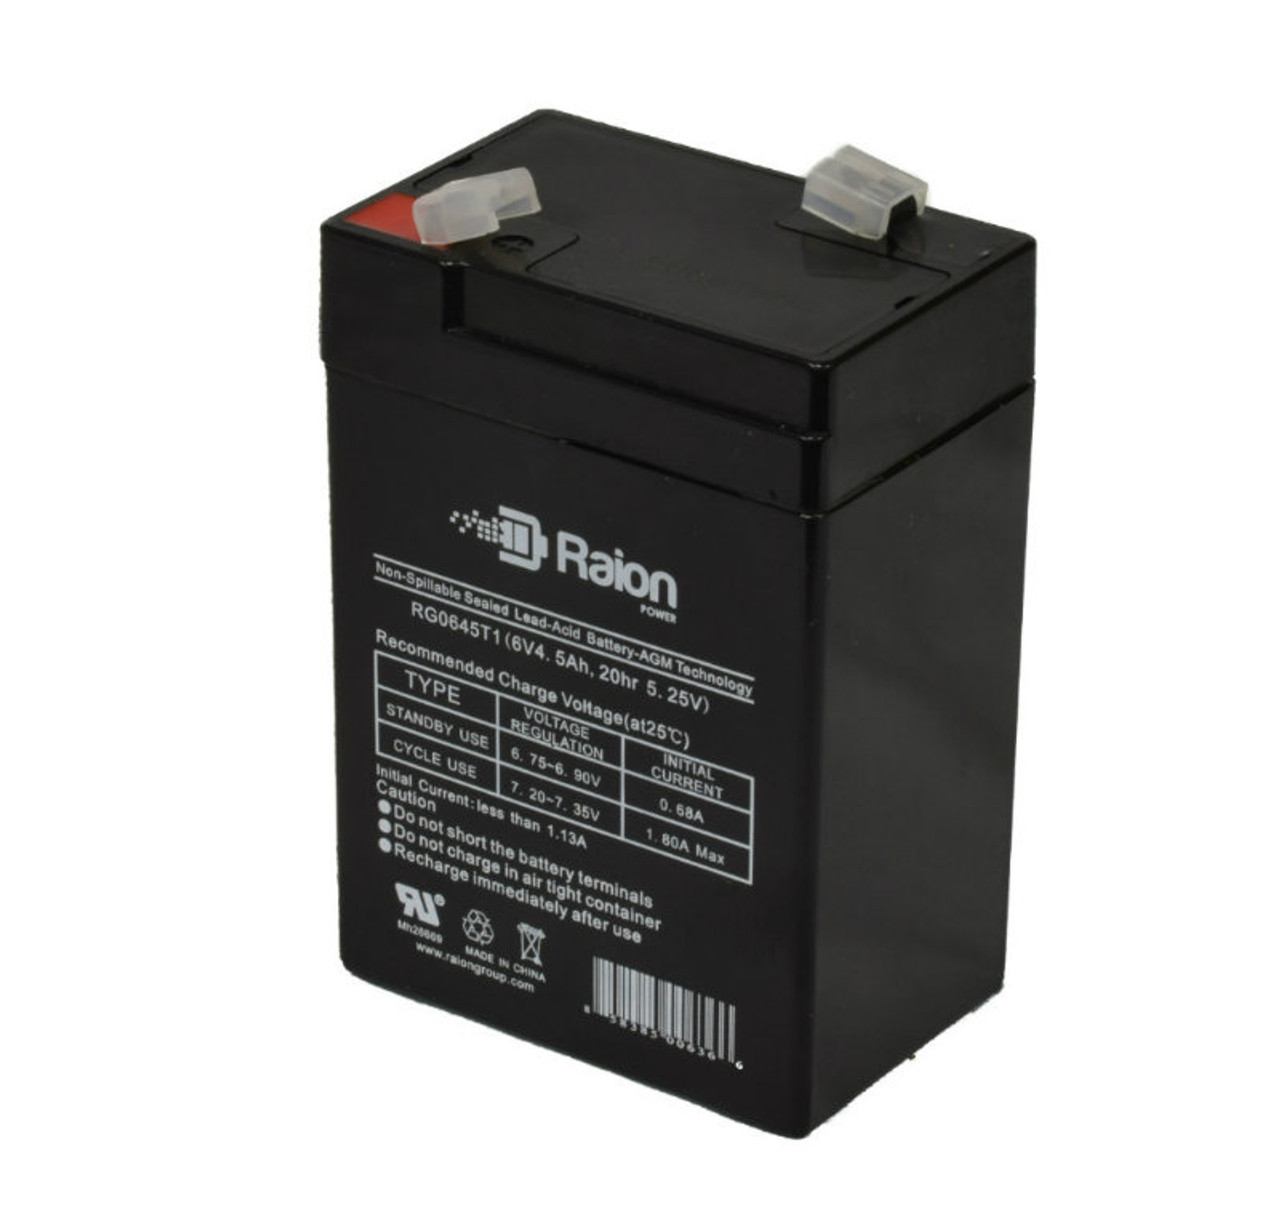 Raion Power RG0645T1 6V 4.5Ah Replacement Battery Cartridge for Flying Power NS6-5